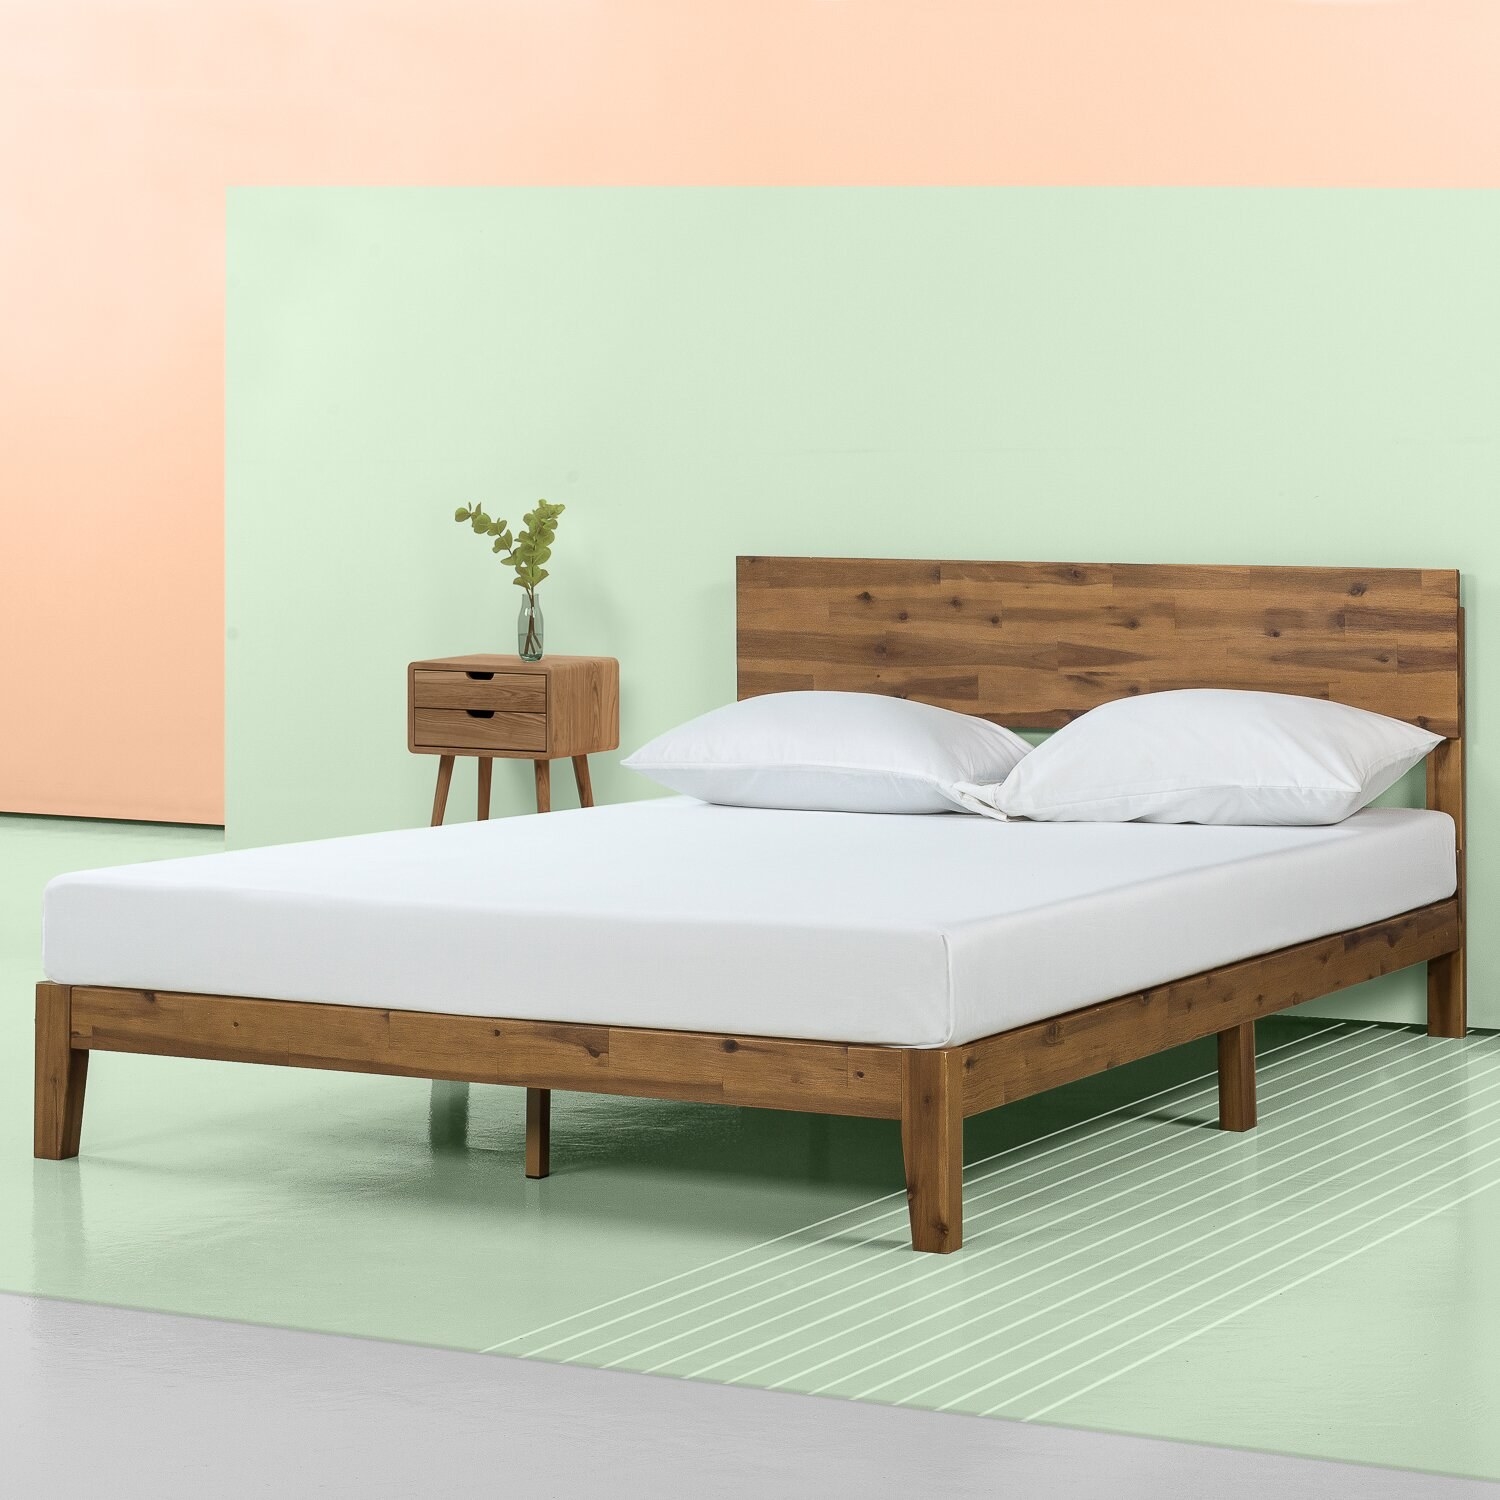 The bed, which is low to the ground, has a headboard, and visible wood grain